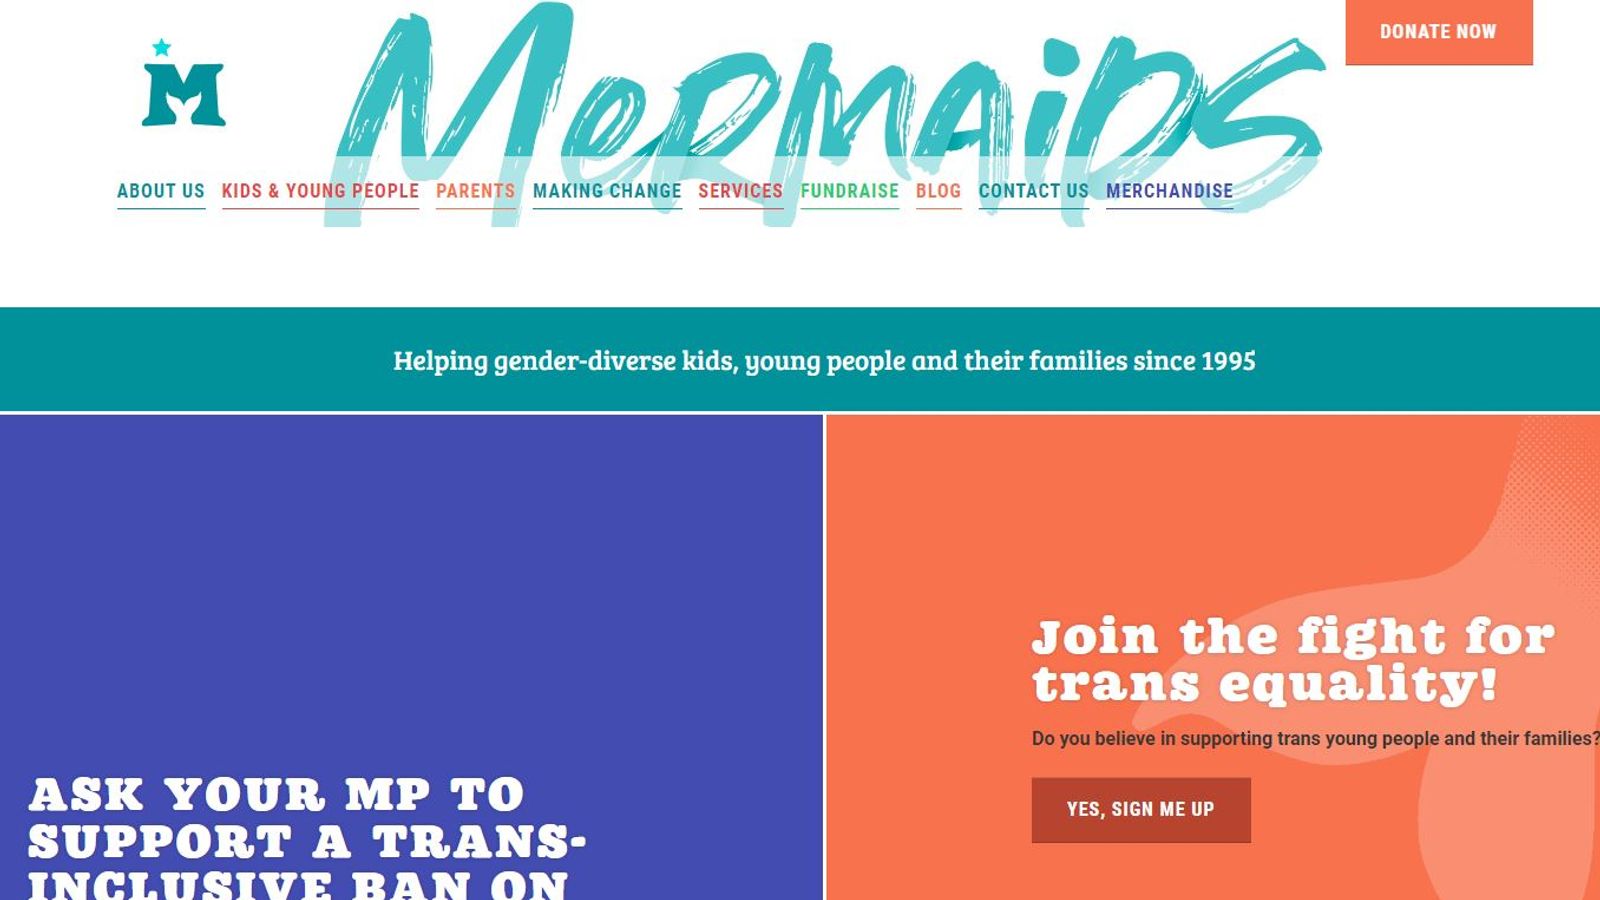 Trans charity Mermaids investigated after ‘offering chest binders without parental consent’